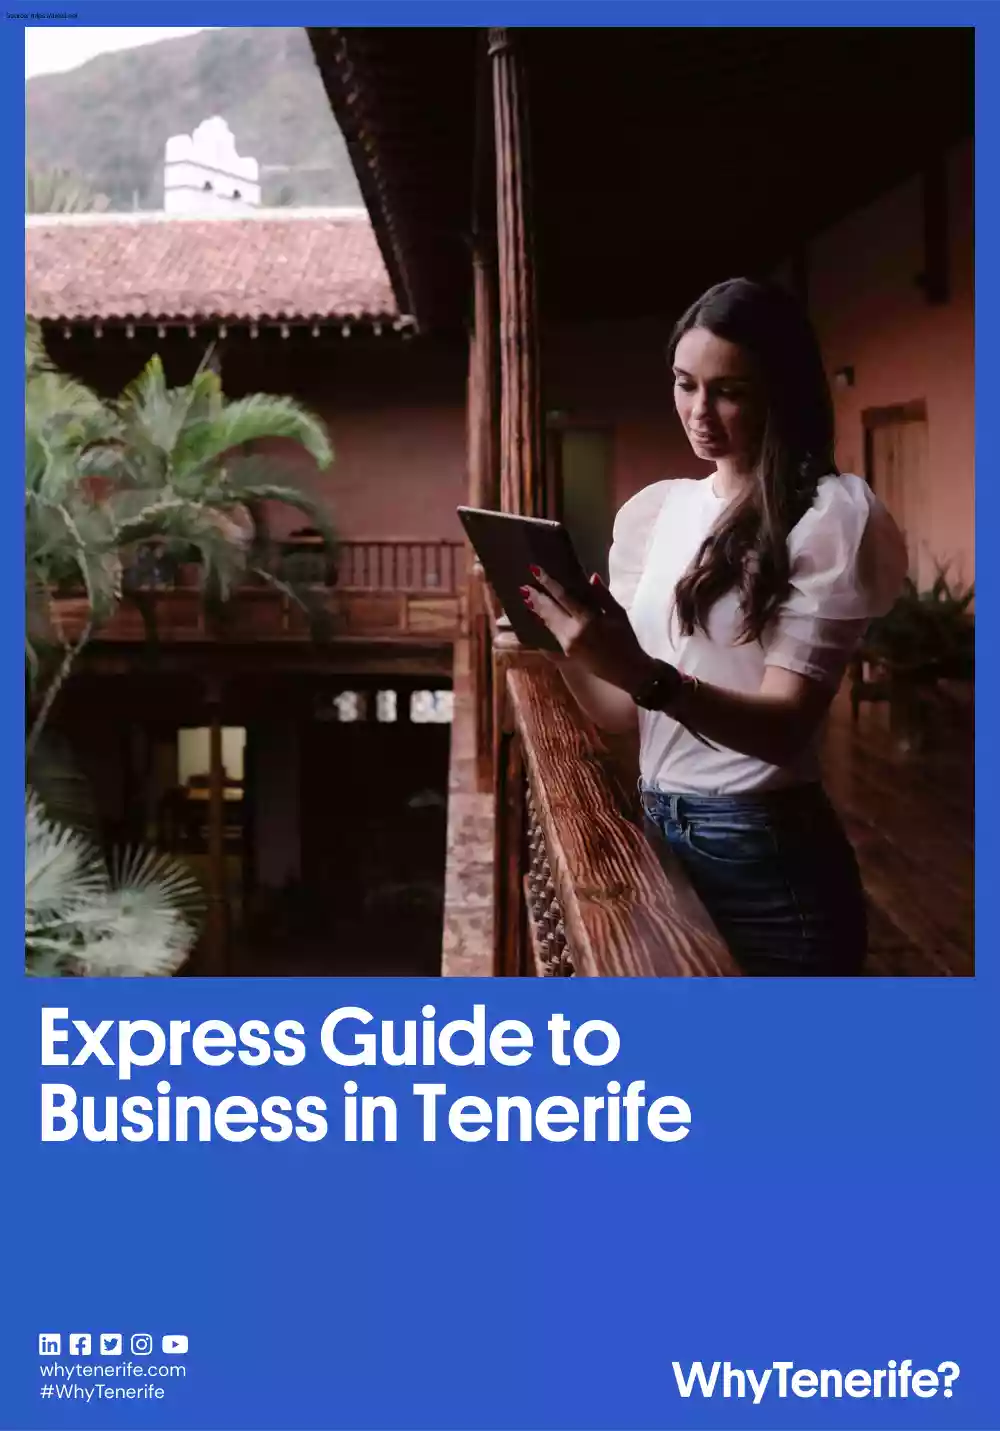 Express Guide to Business in Tenerife